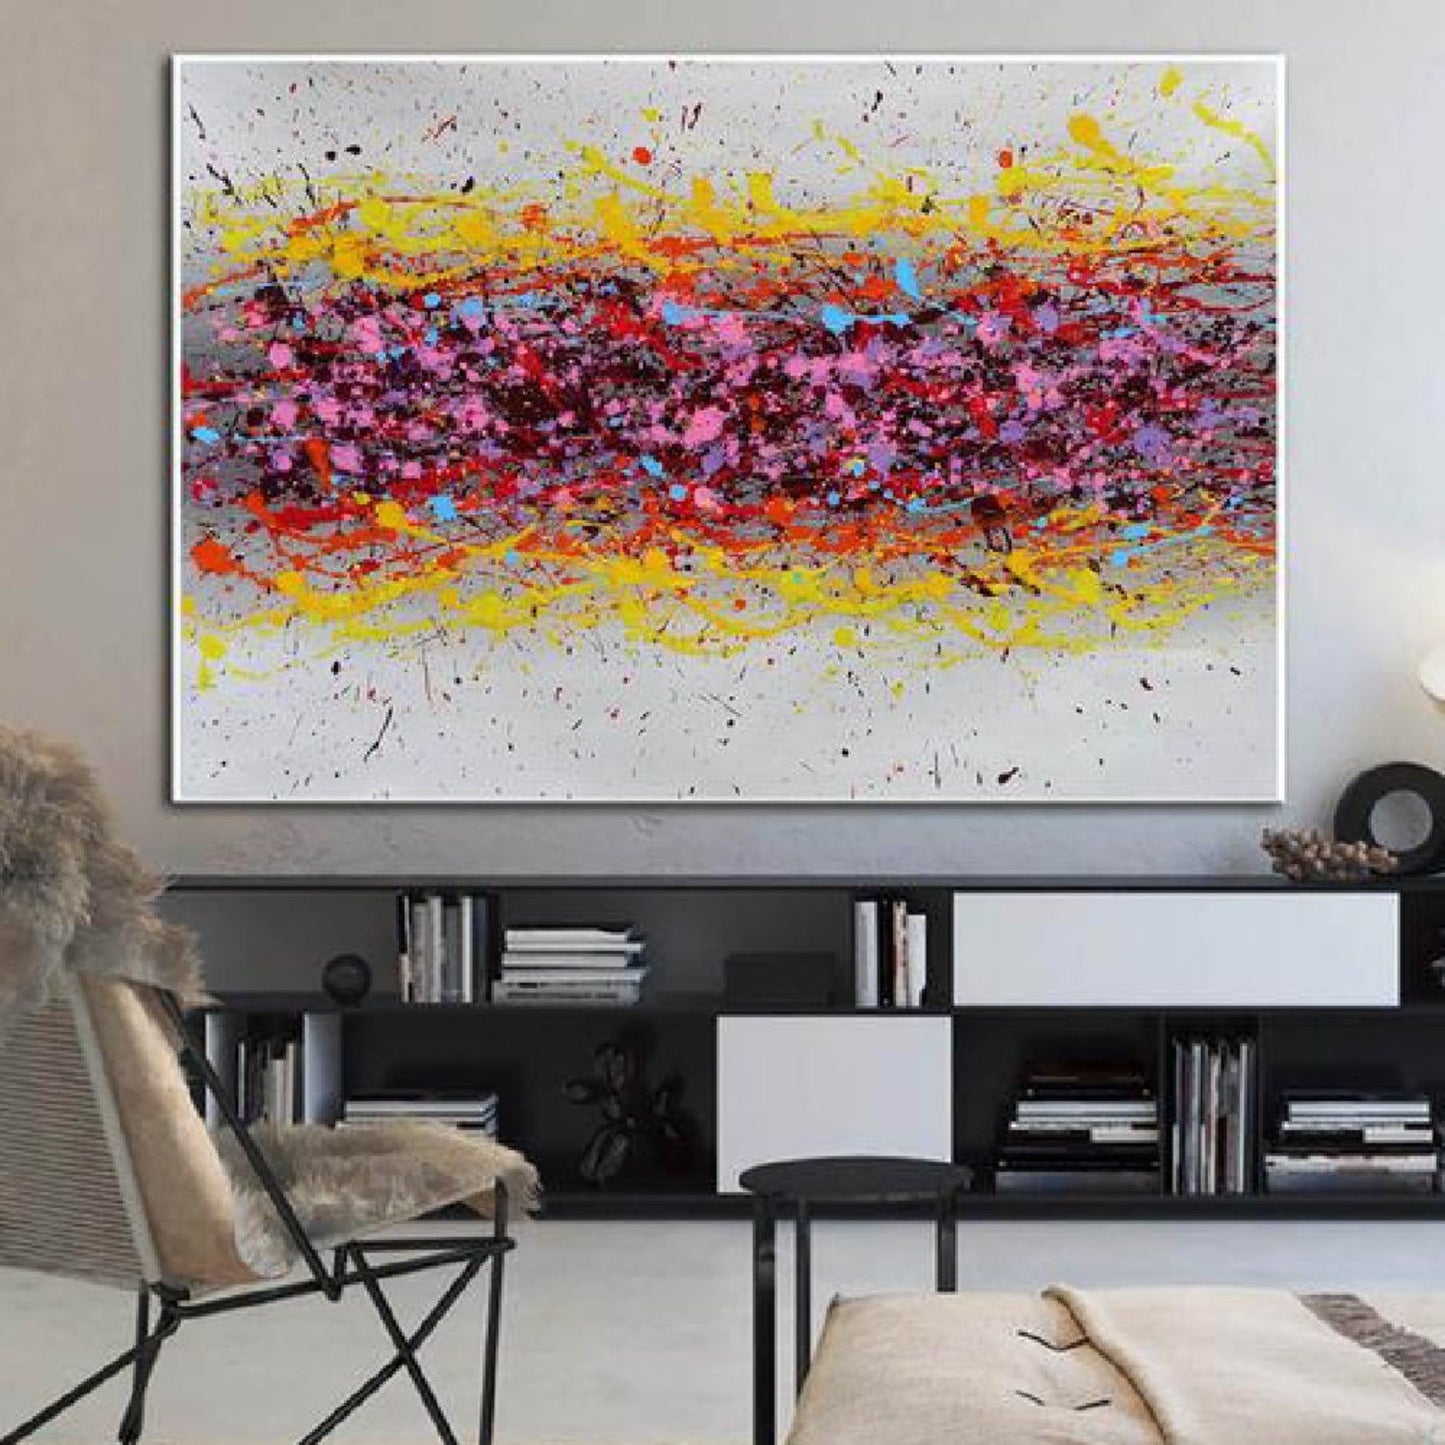 Acrylic Red Pollock Dripping Original Oil Painting